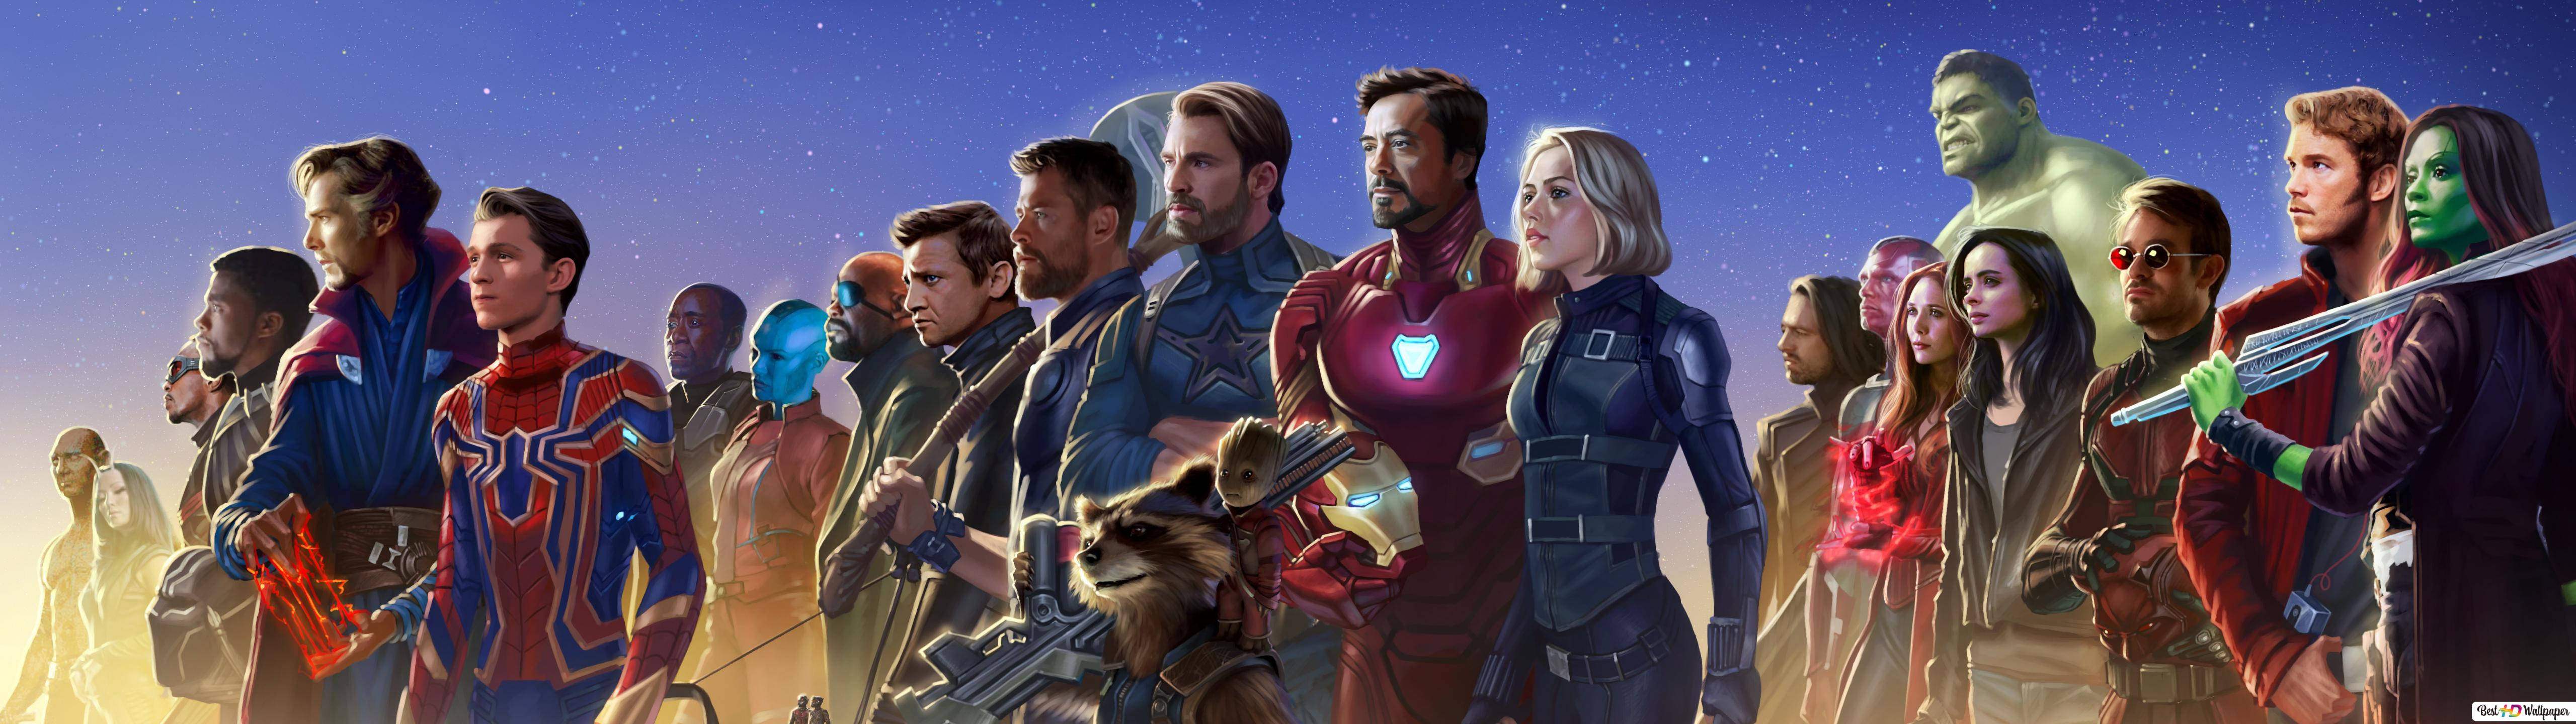 Marvel The Endgame Characters 5120 X 1440